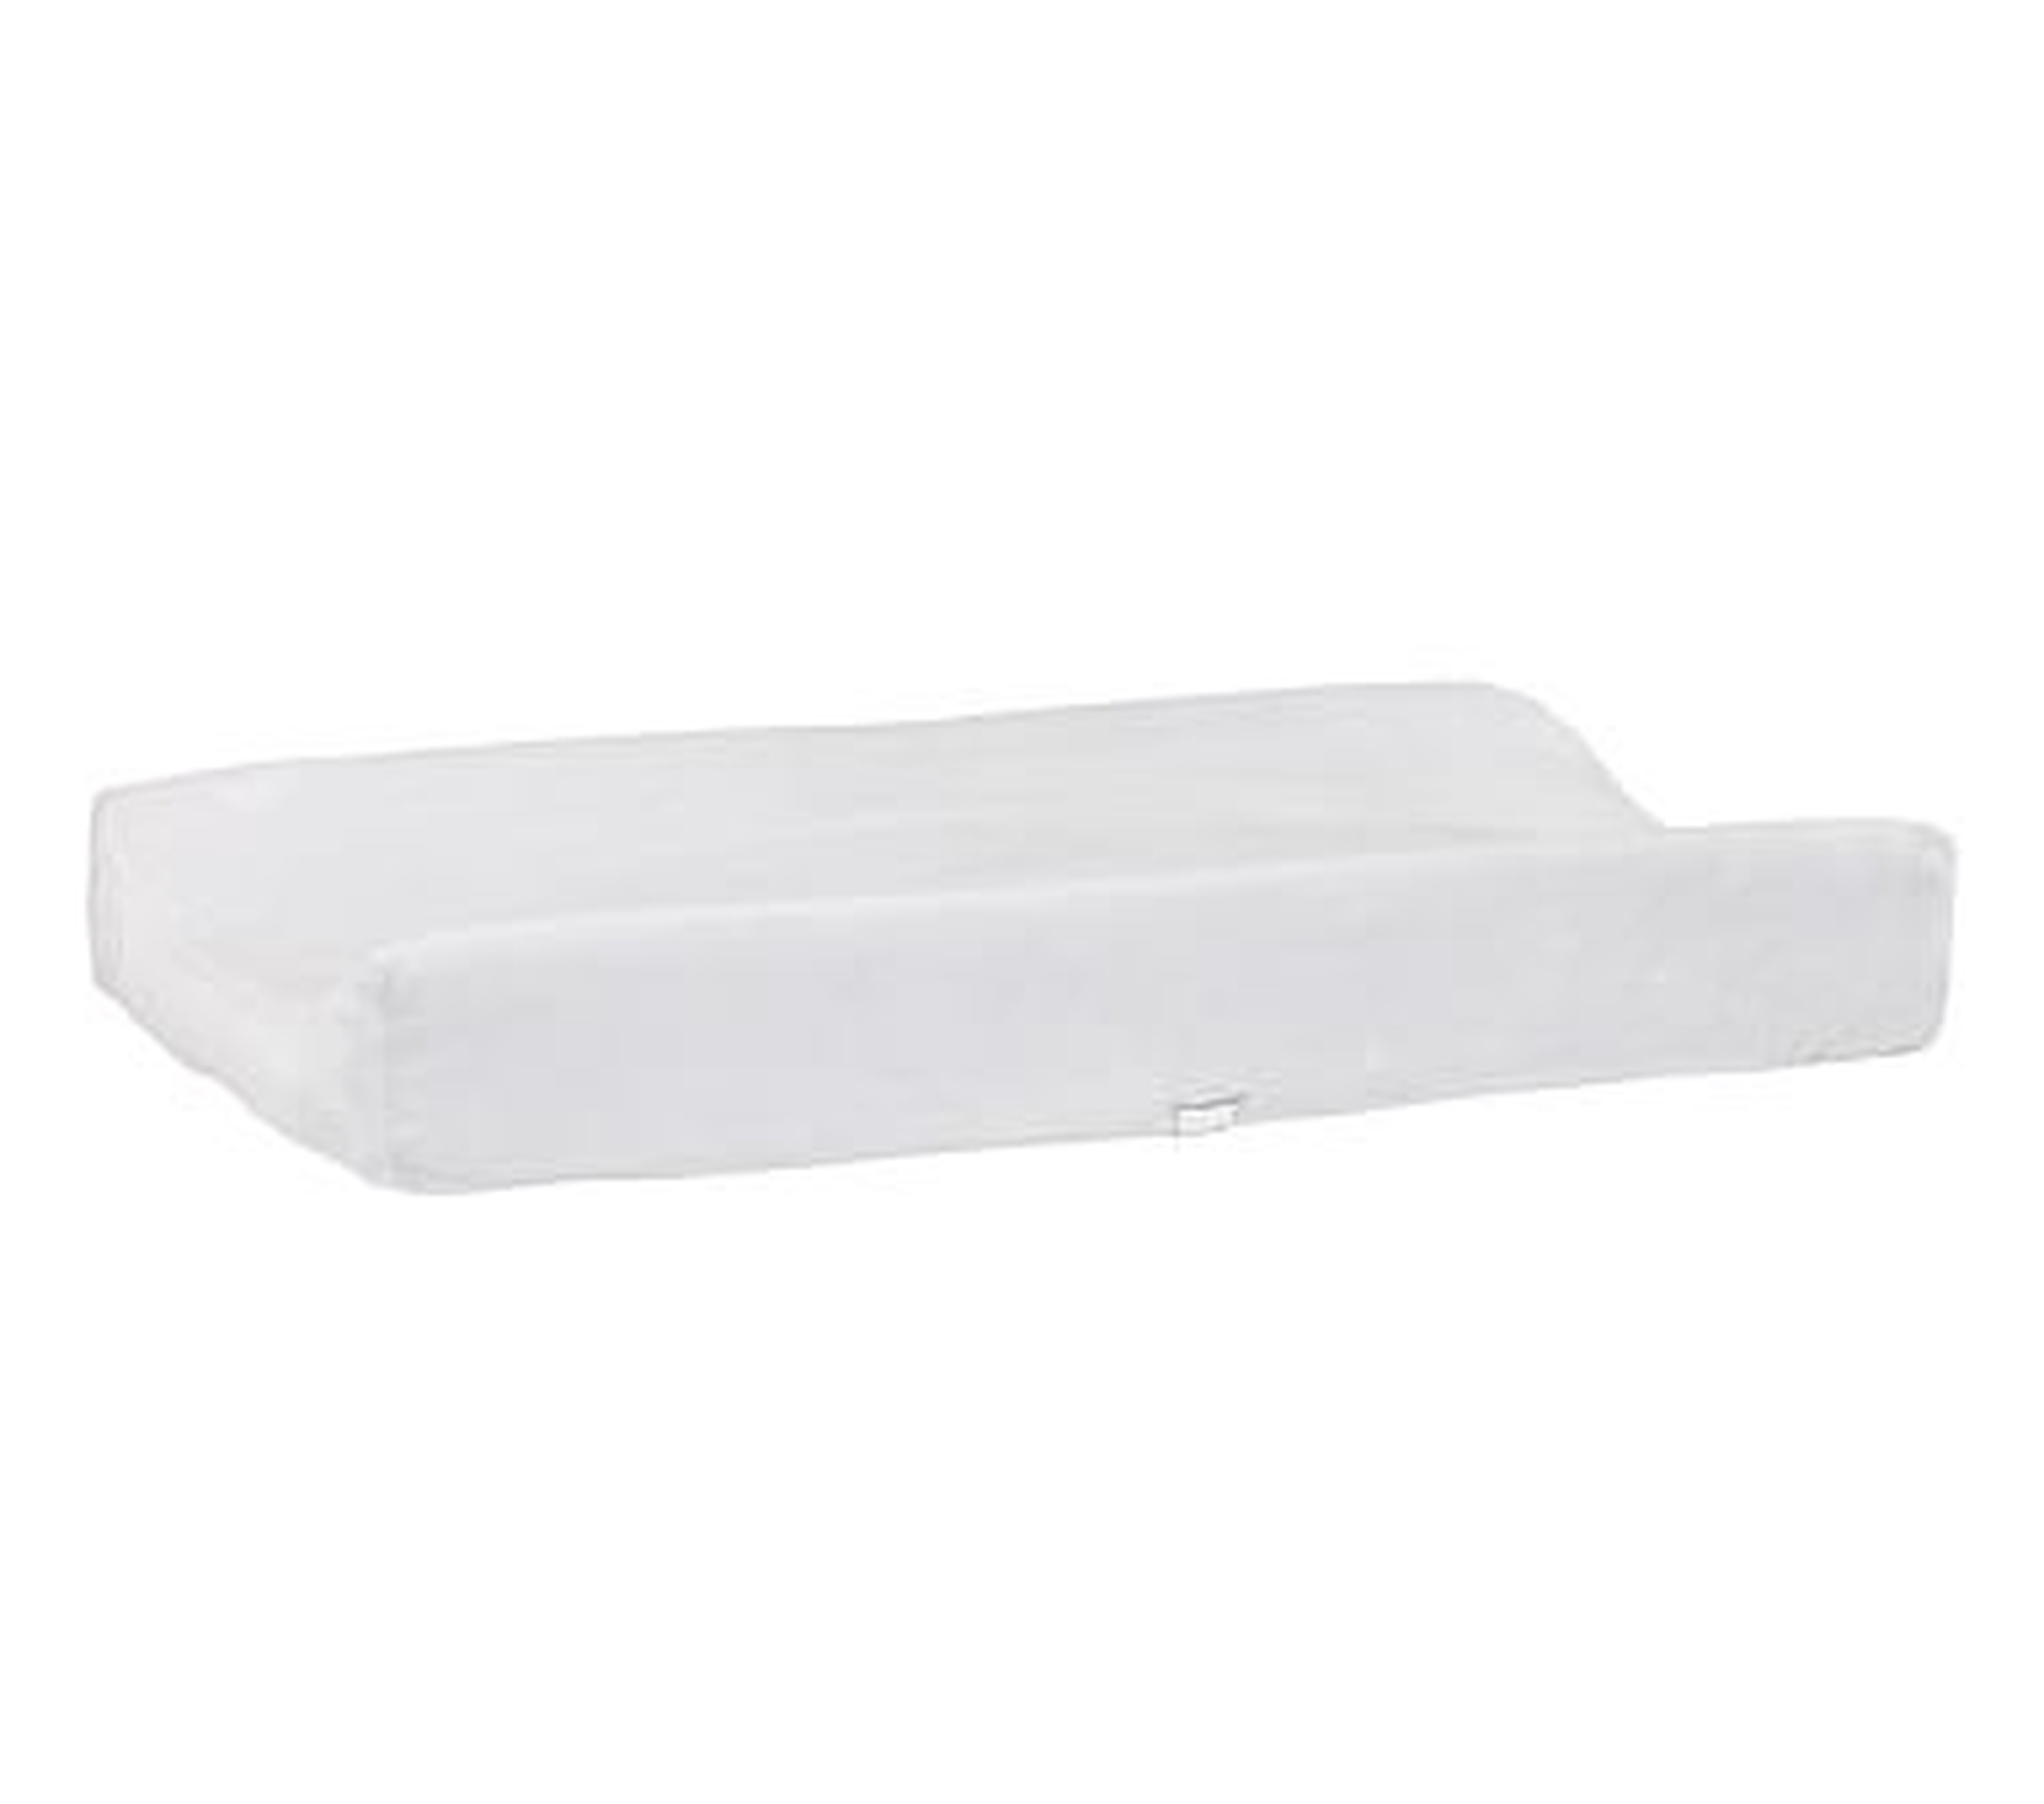 Organic Solid Changing Pad Cover, White - Pottery Barn Kids